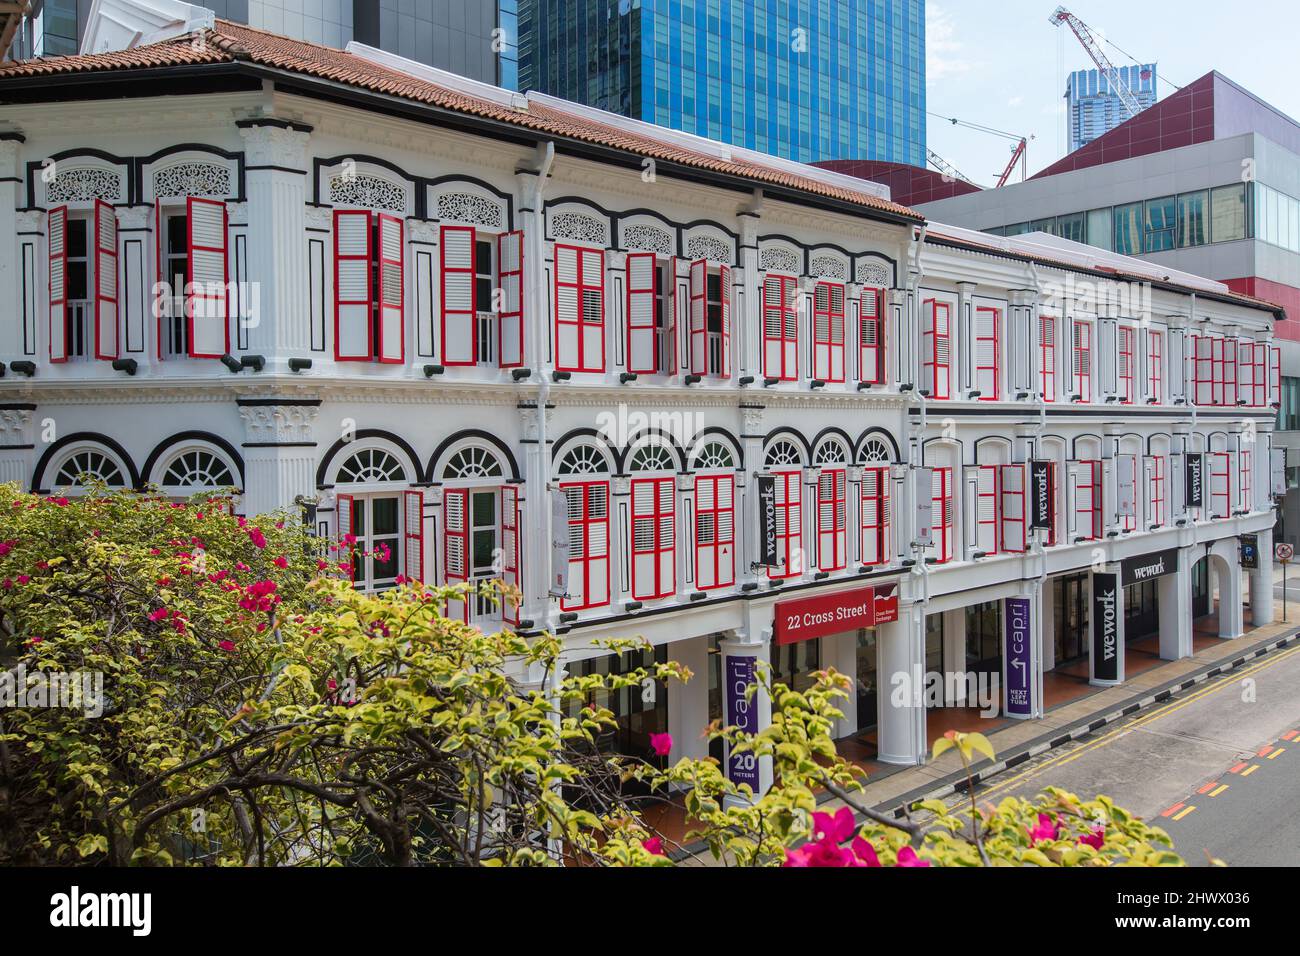 Old shophouses refurnished into a commercial structure for business. Chinatown, Singapore. Stock Photo